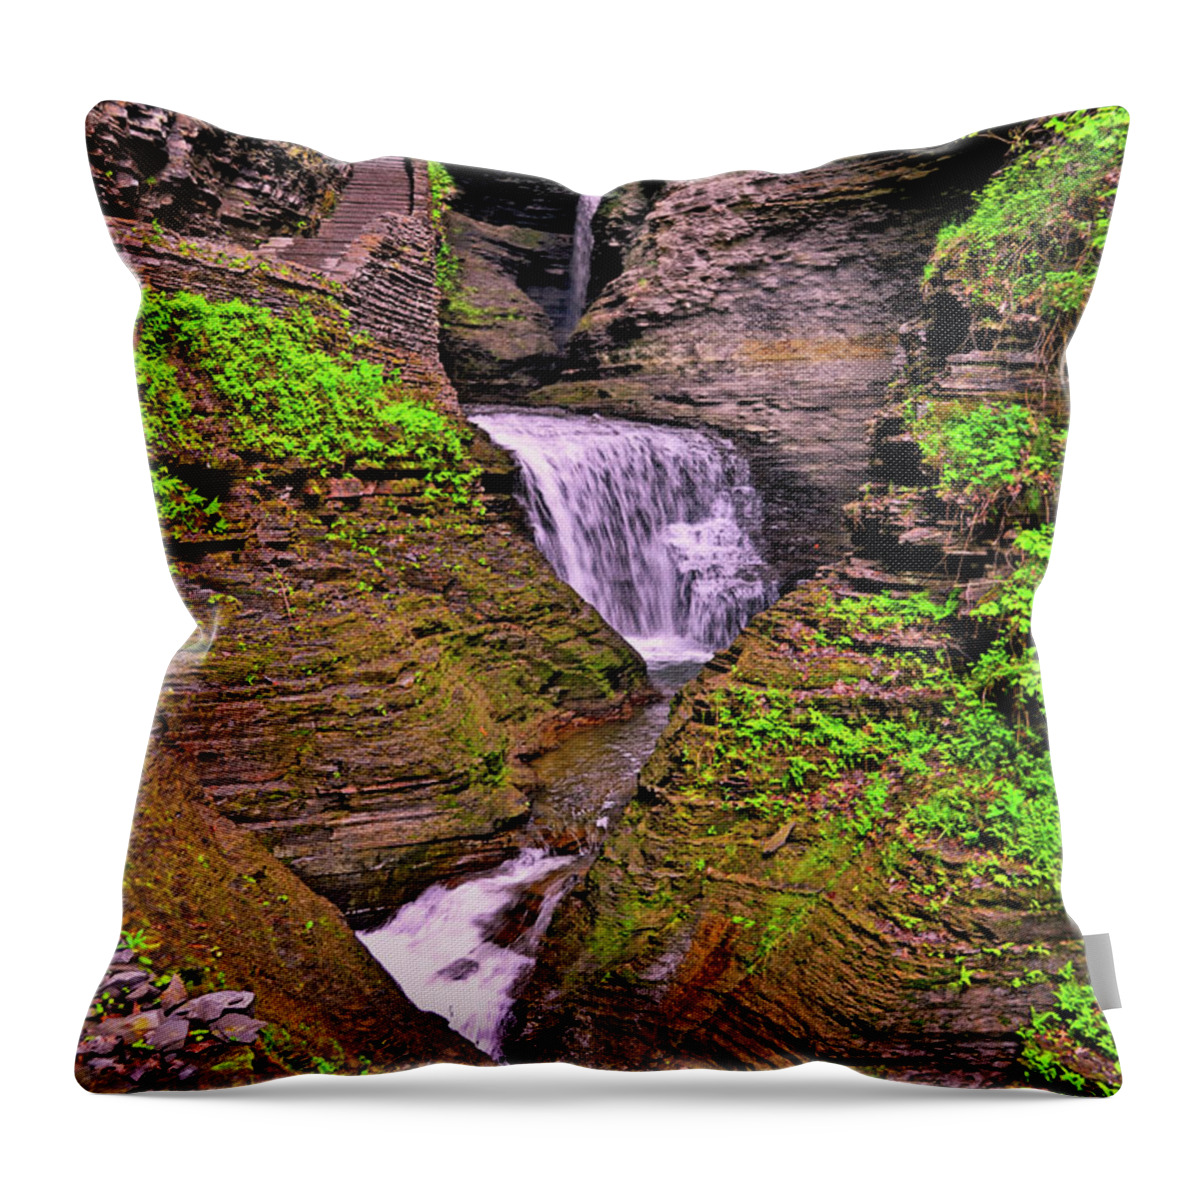 Waterfall Throw Pillow featuring the photograph Watkins Glen State Park 008 by George Bostian